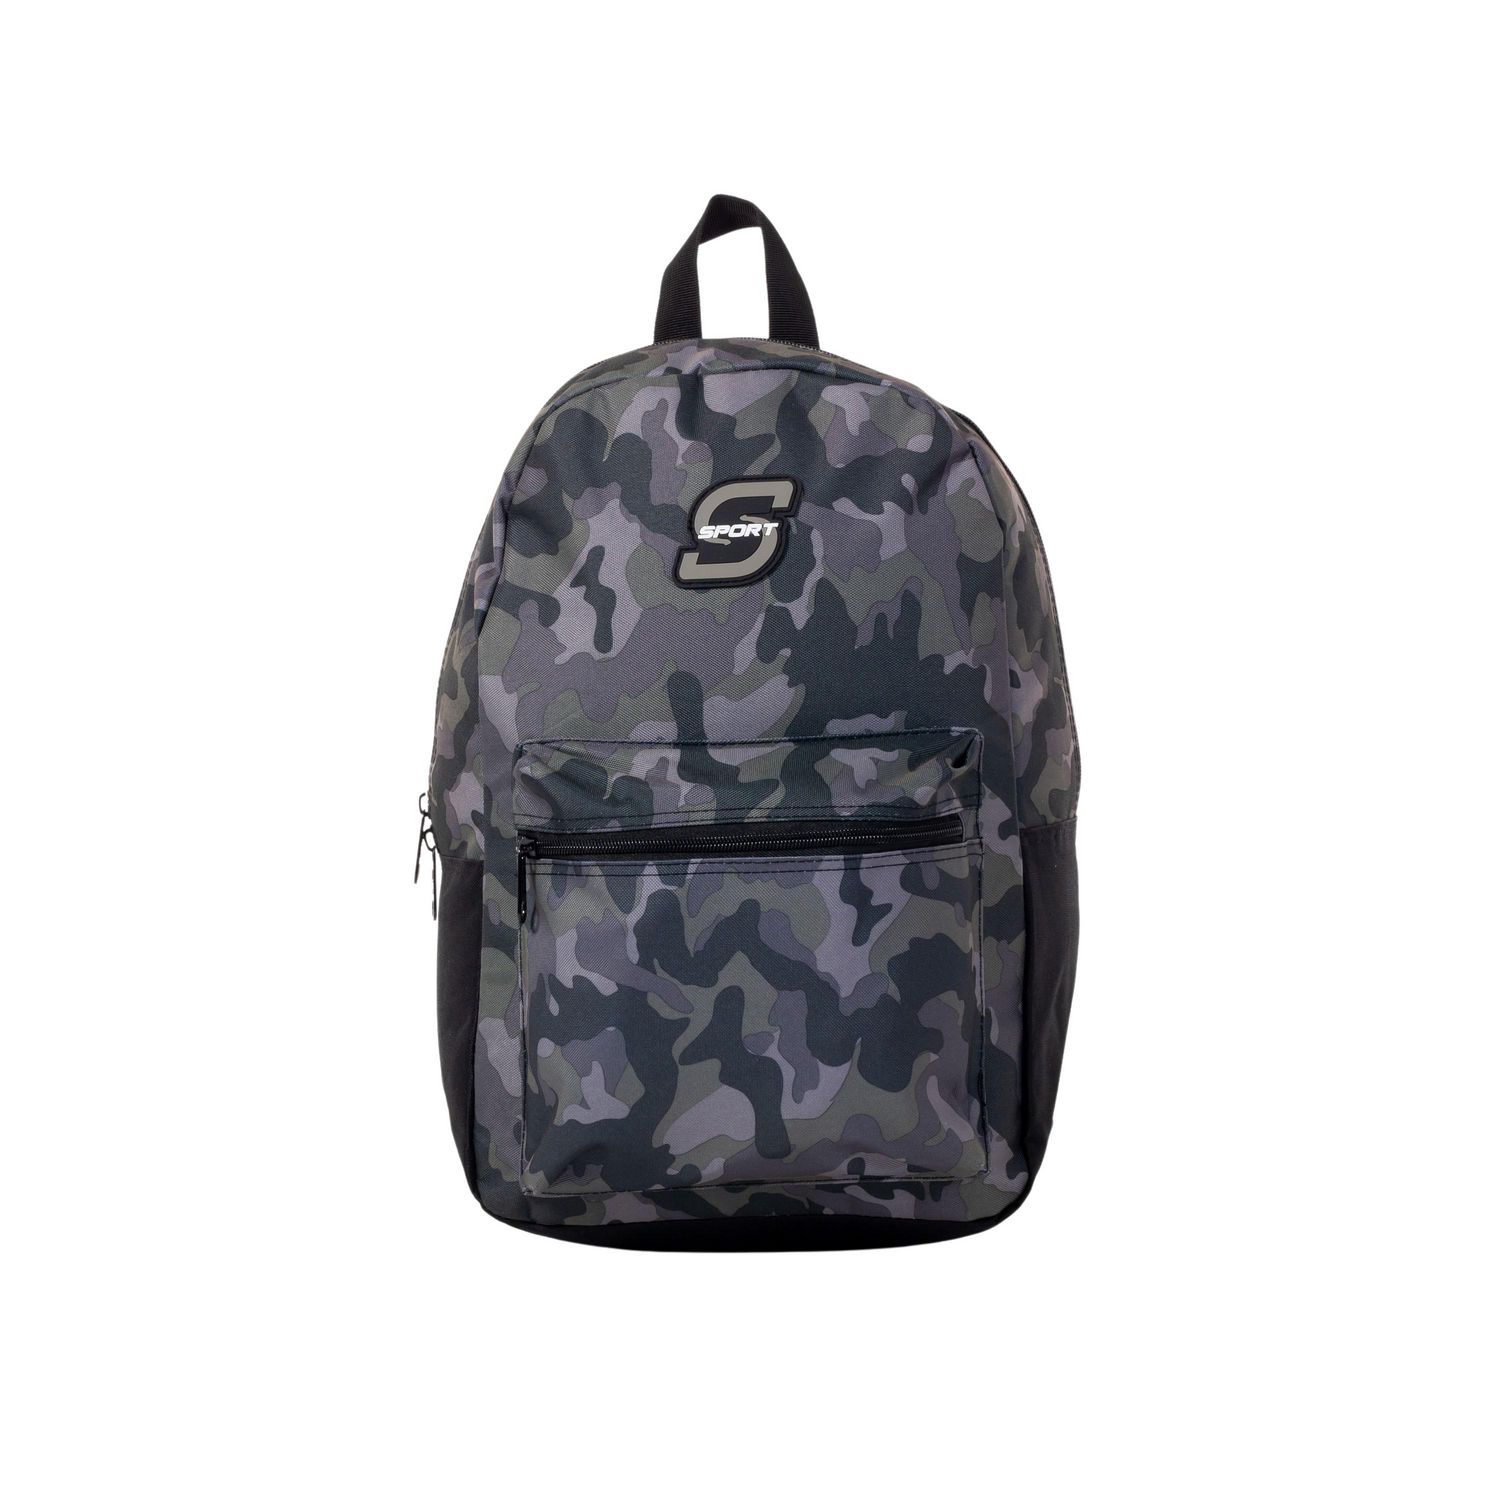 Camo Mohicla Female City Pack Women's Backpack Handbag Girls Backpack  Casual Bags Backpack for Ladies Small